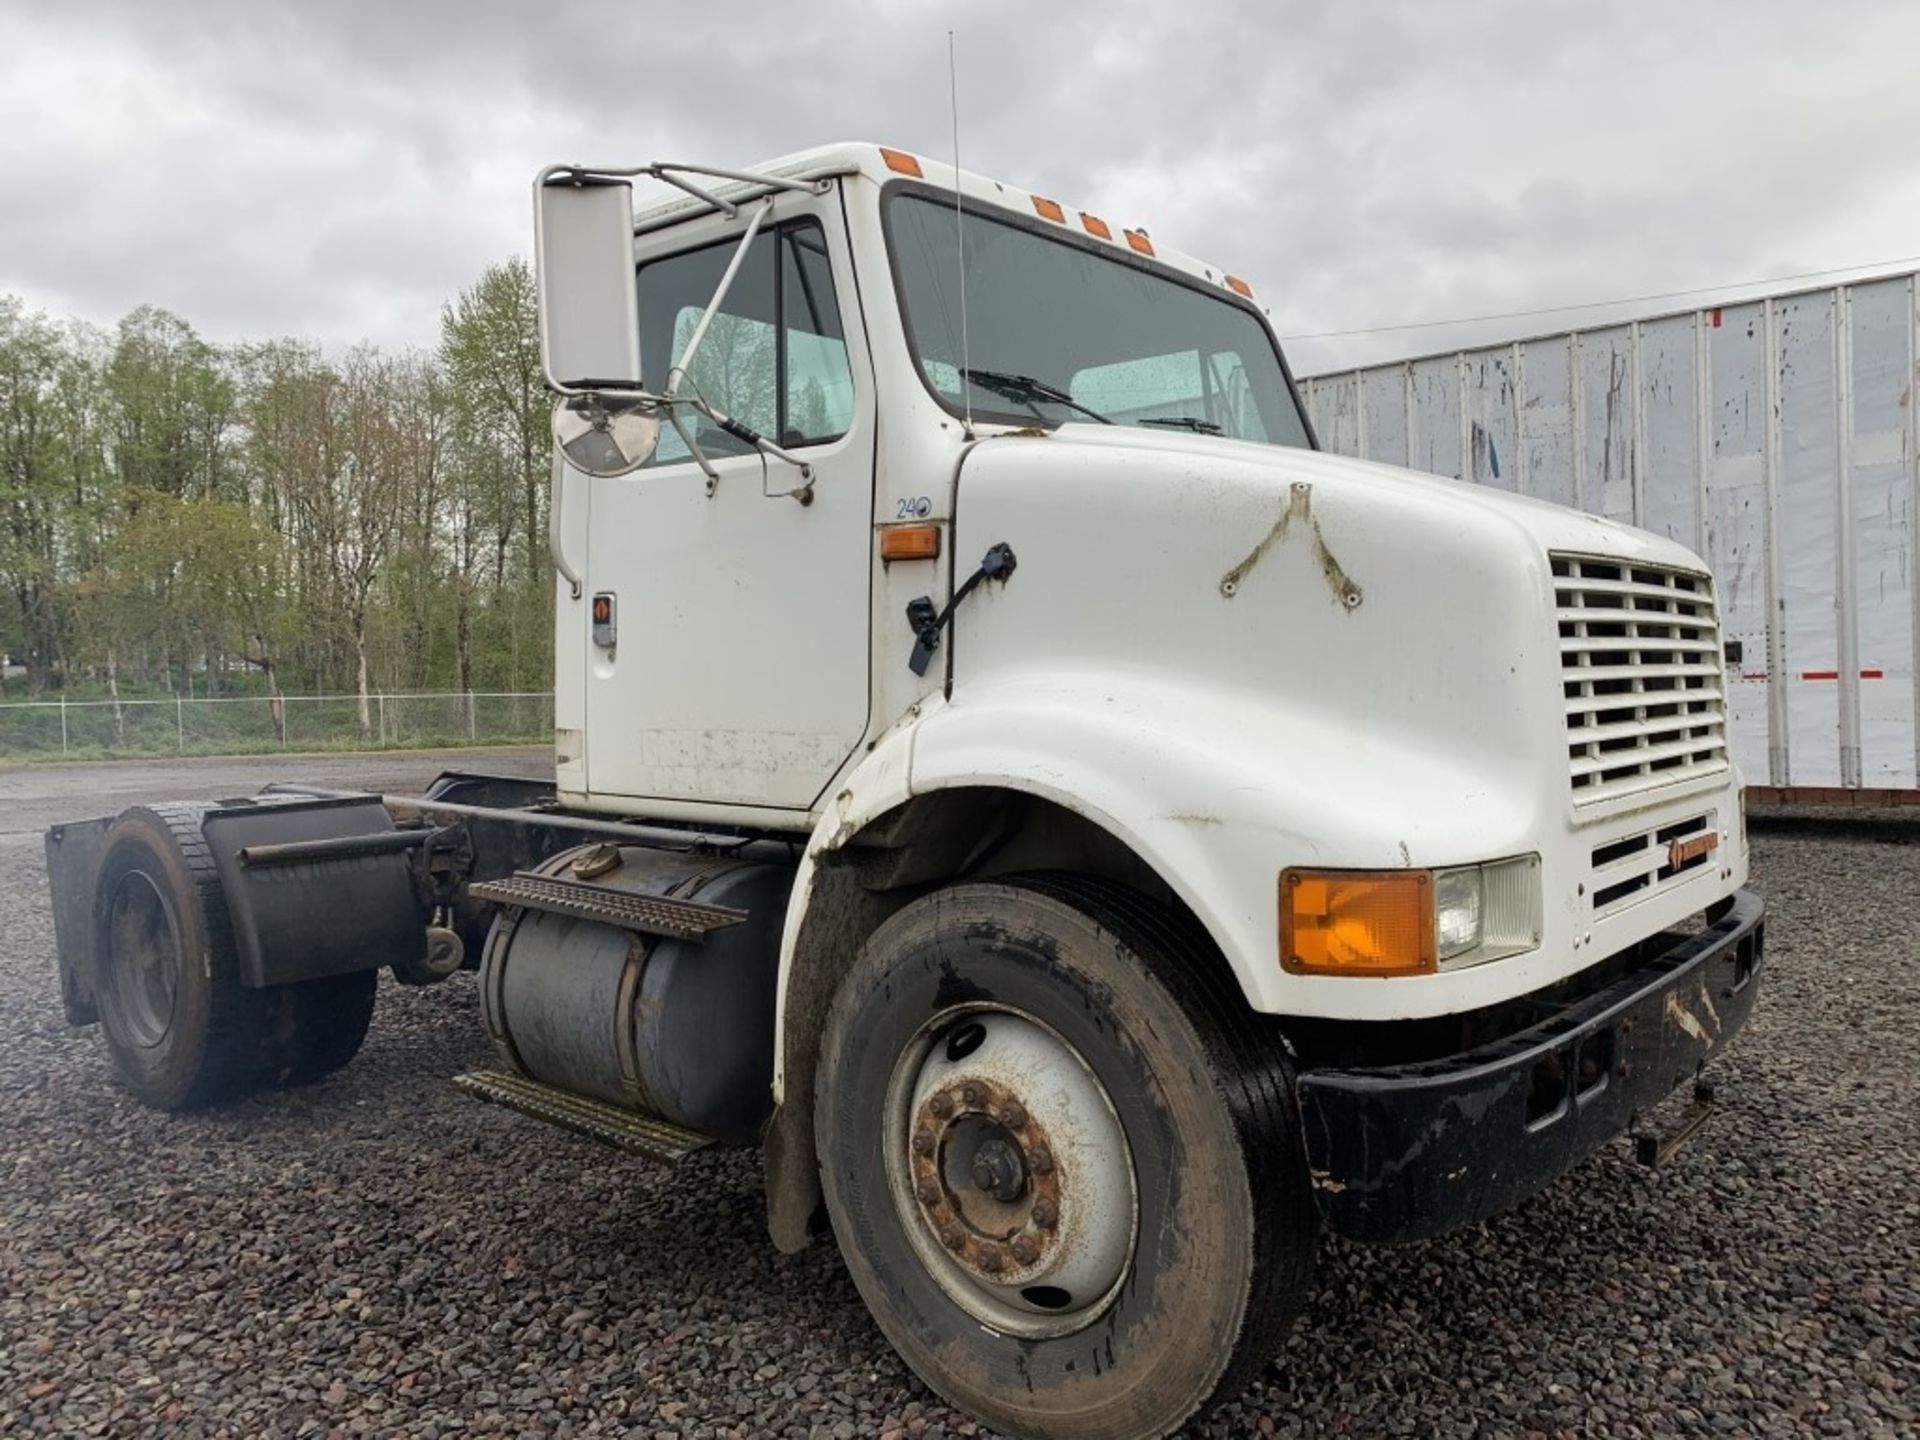 1990 International 7100 S/A Cab & Chassis - Image 2 of 17